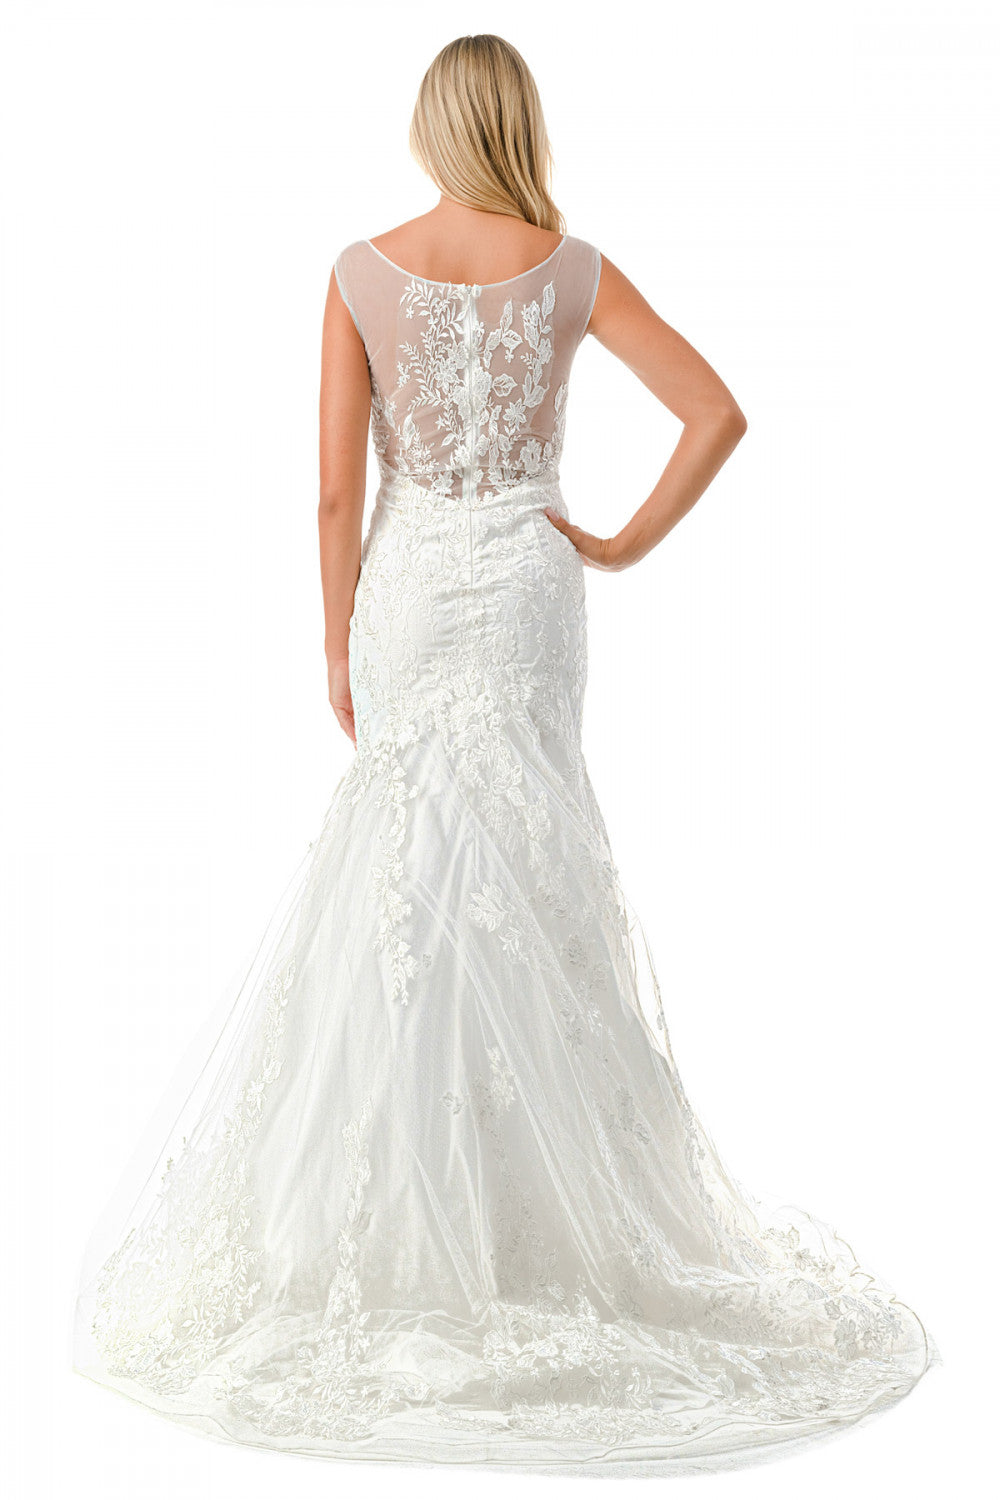 Aspeed Design -MS0021 Sweetheart Illusion Trumpet Bridal Gown